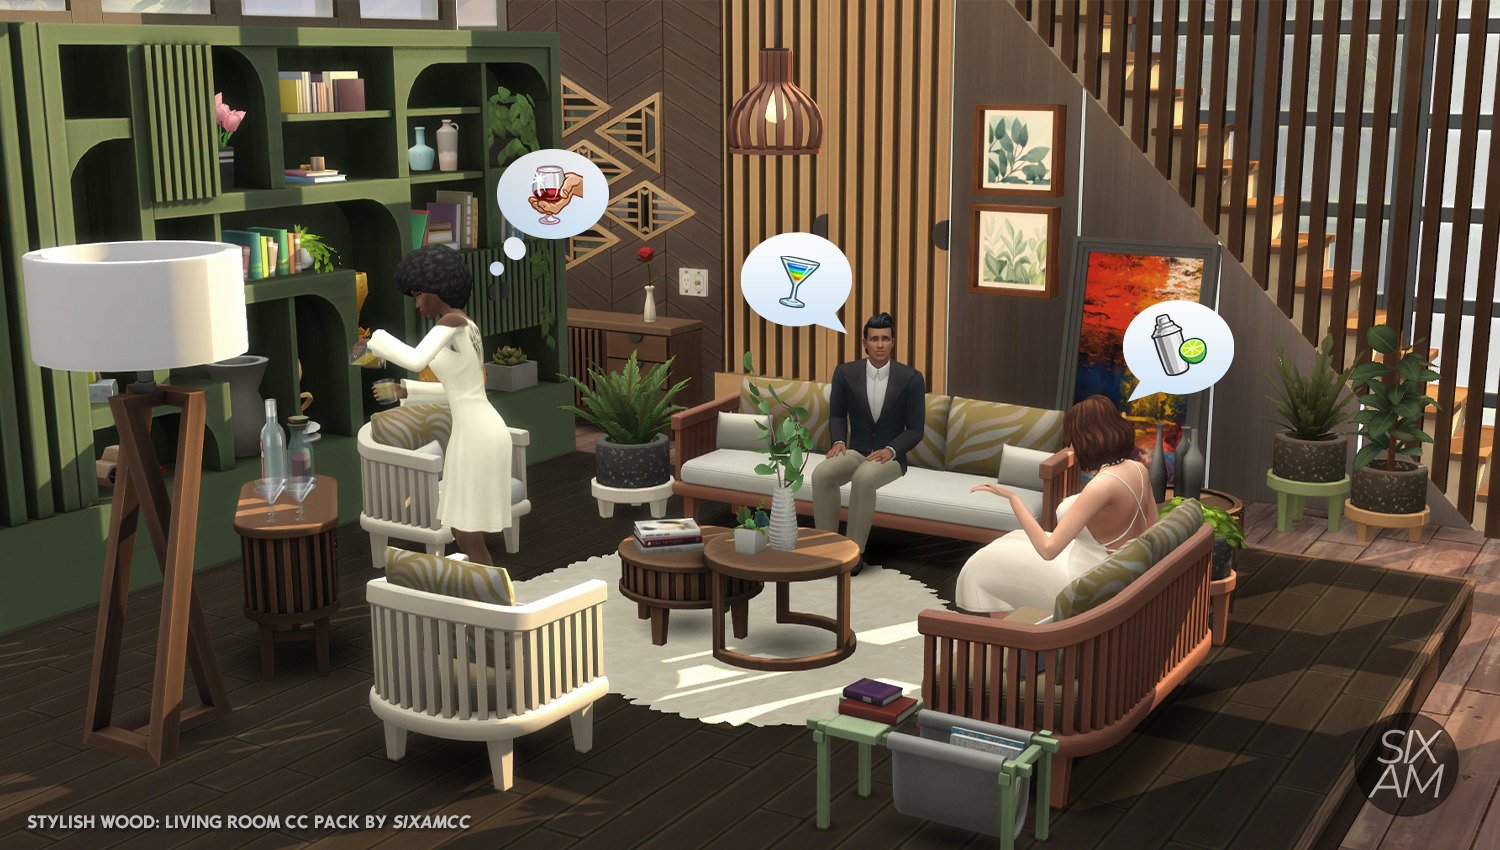 Stylish Wood Living Room Cc Pack For The Sims 4 Sixam Cc Spaceship